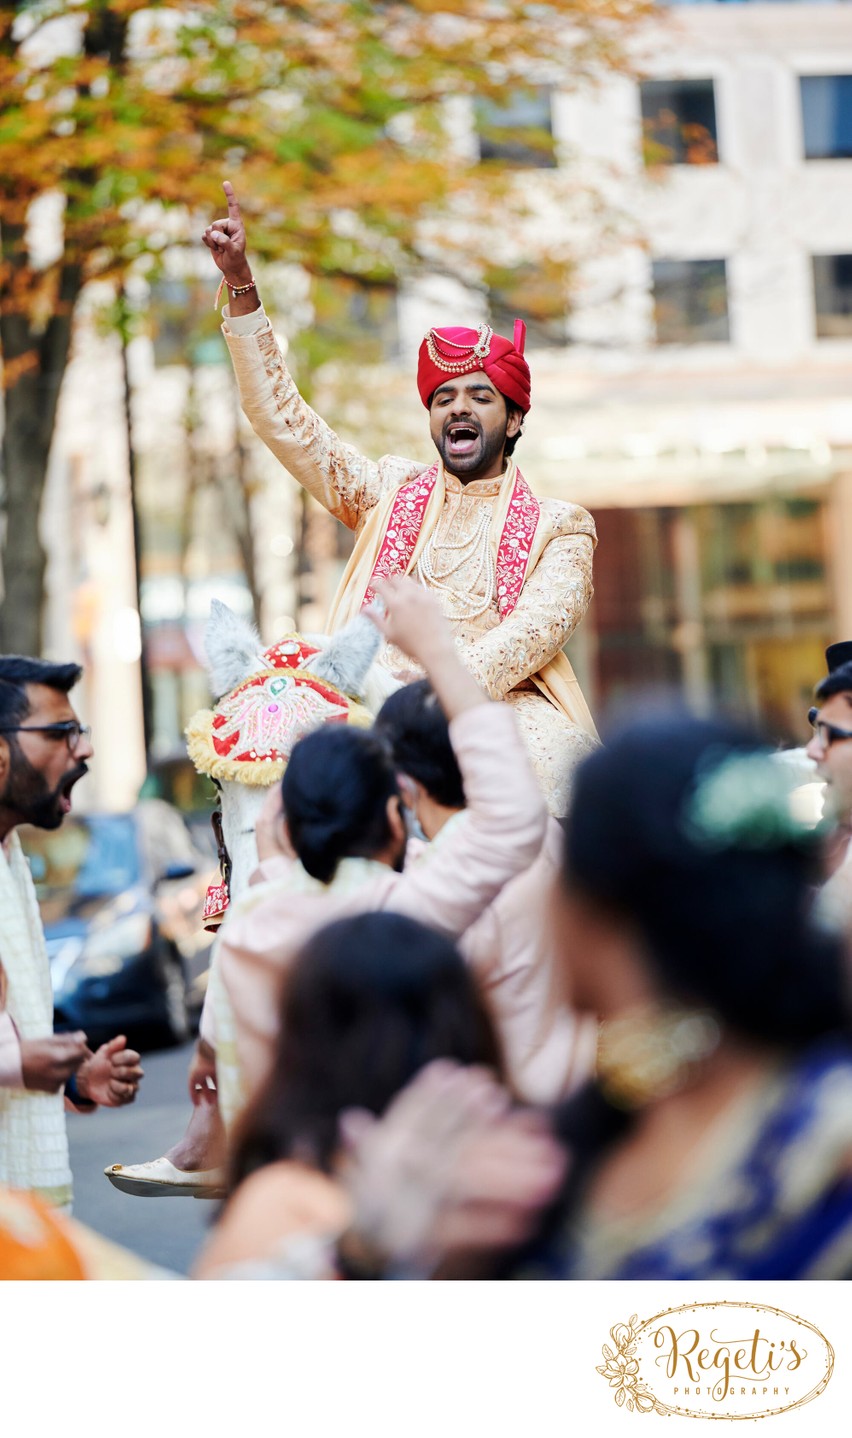 Groom on the horse for the Baraat